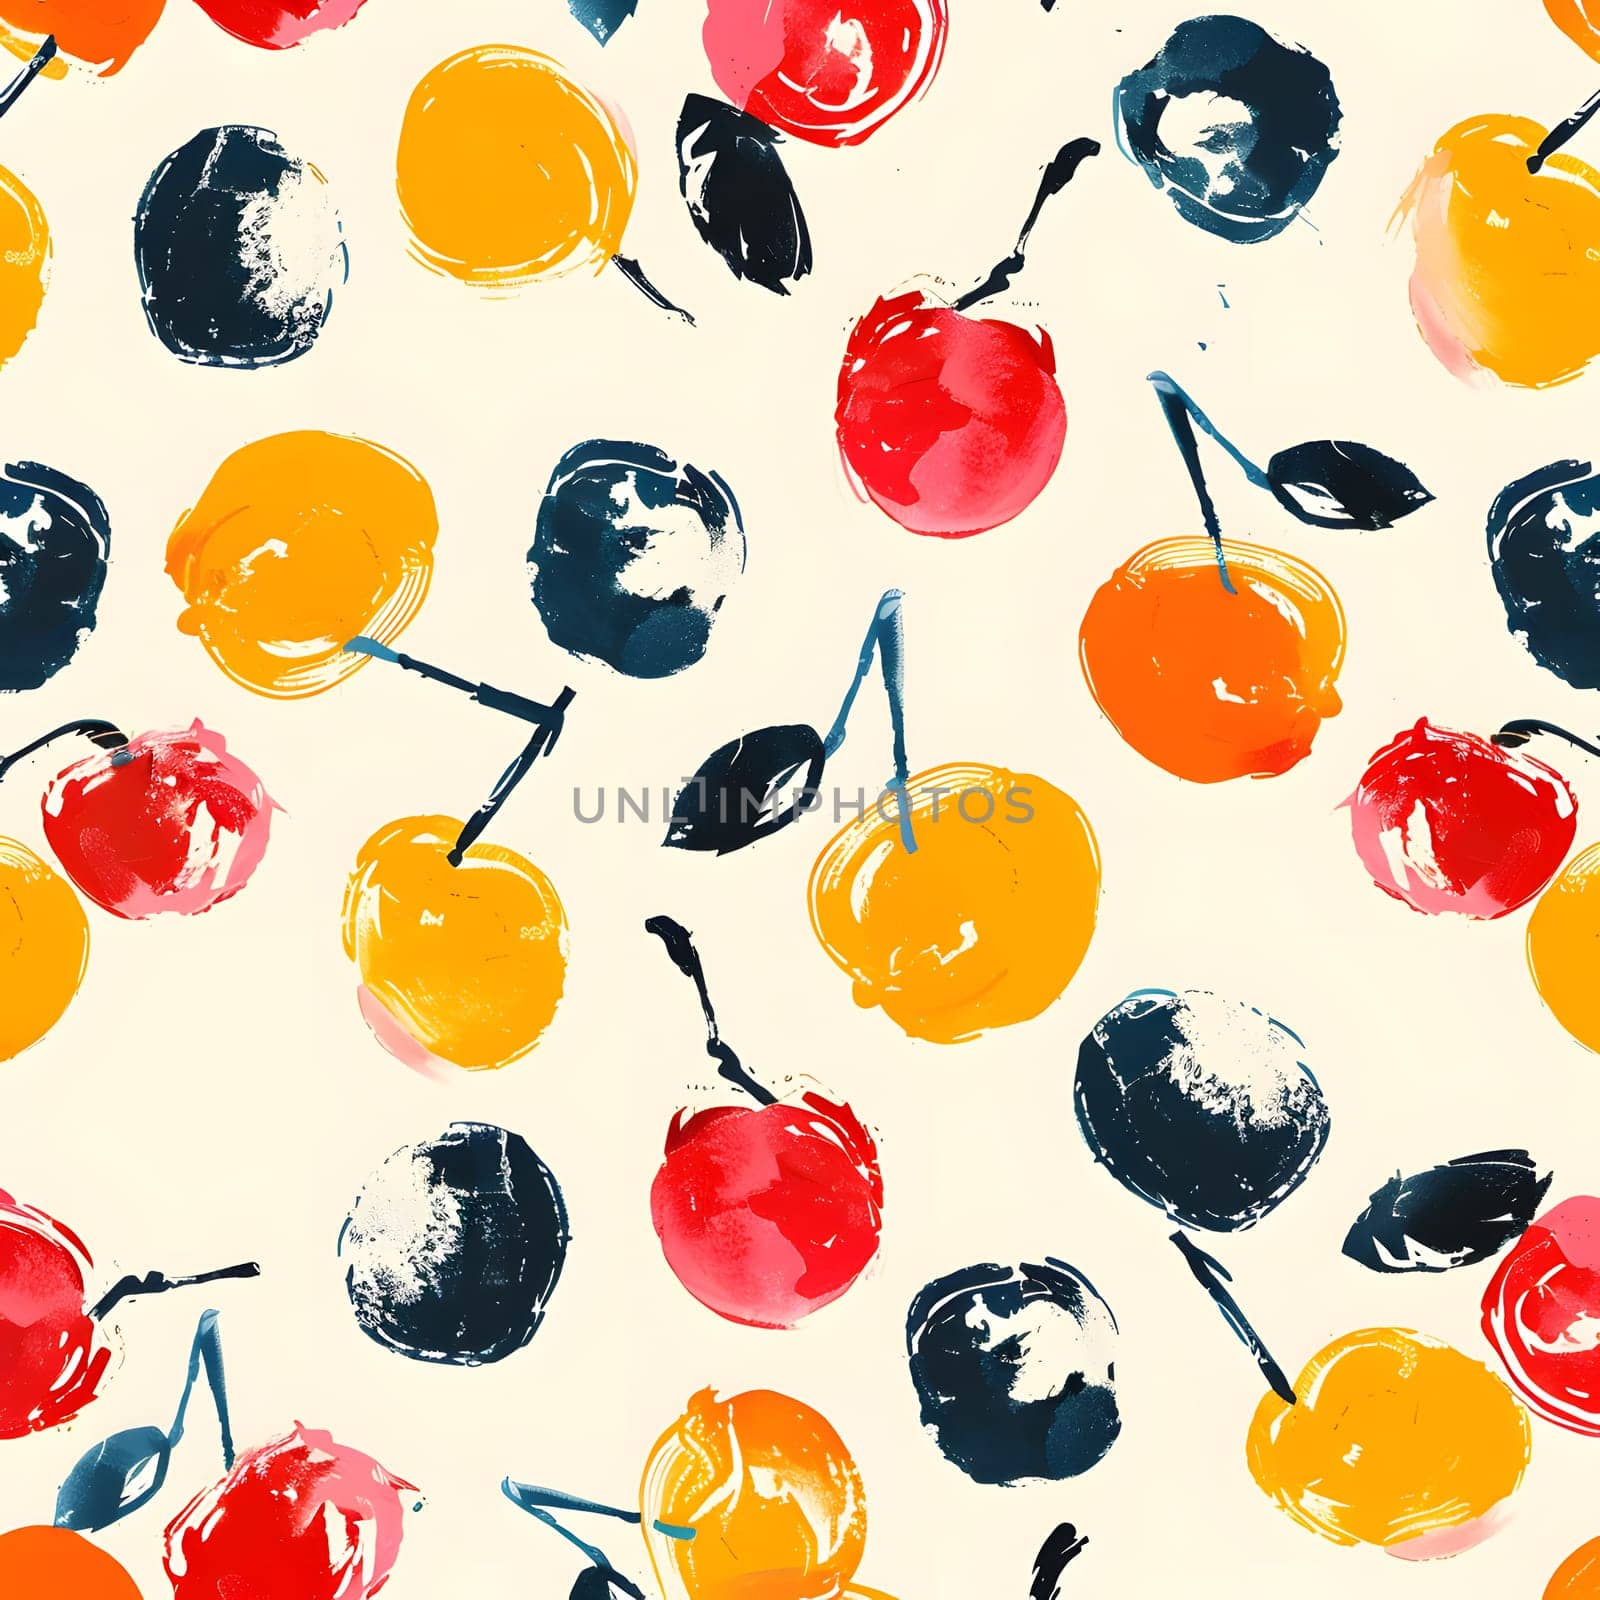 a seamless pattern of colorful cherries on a white background by Nadtochiy